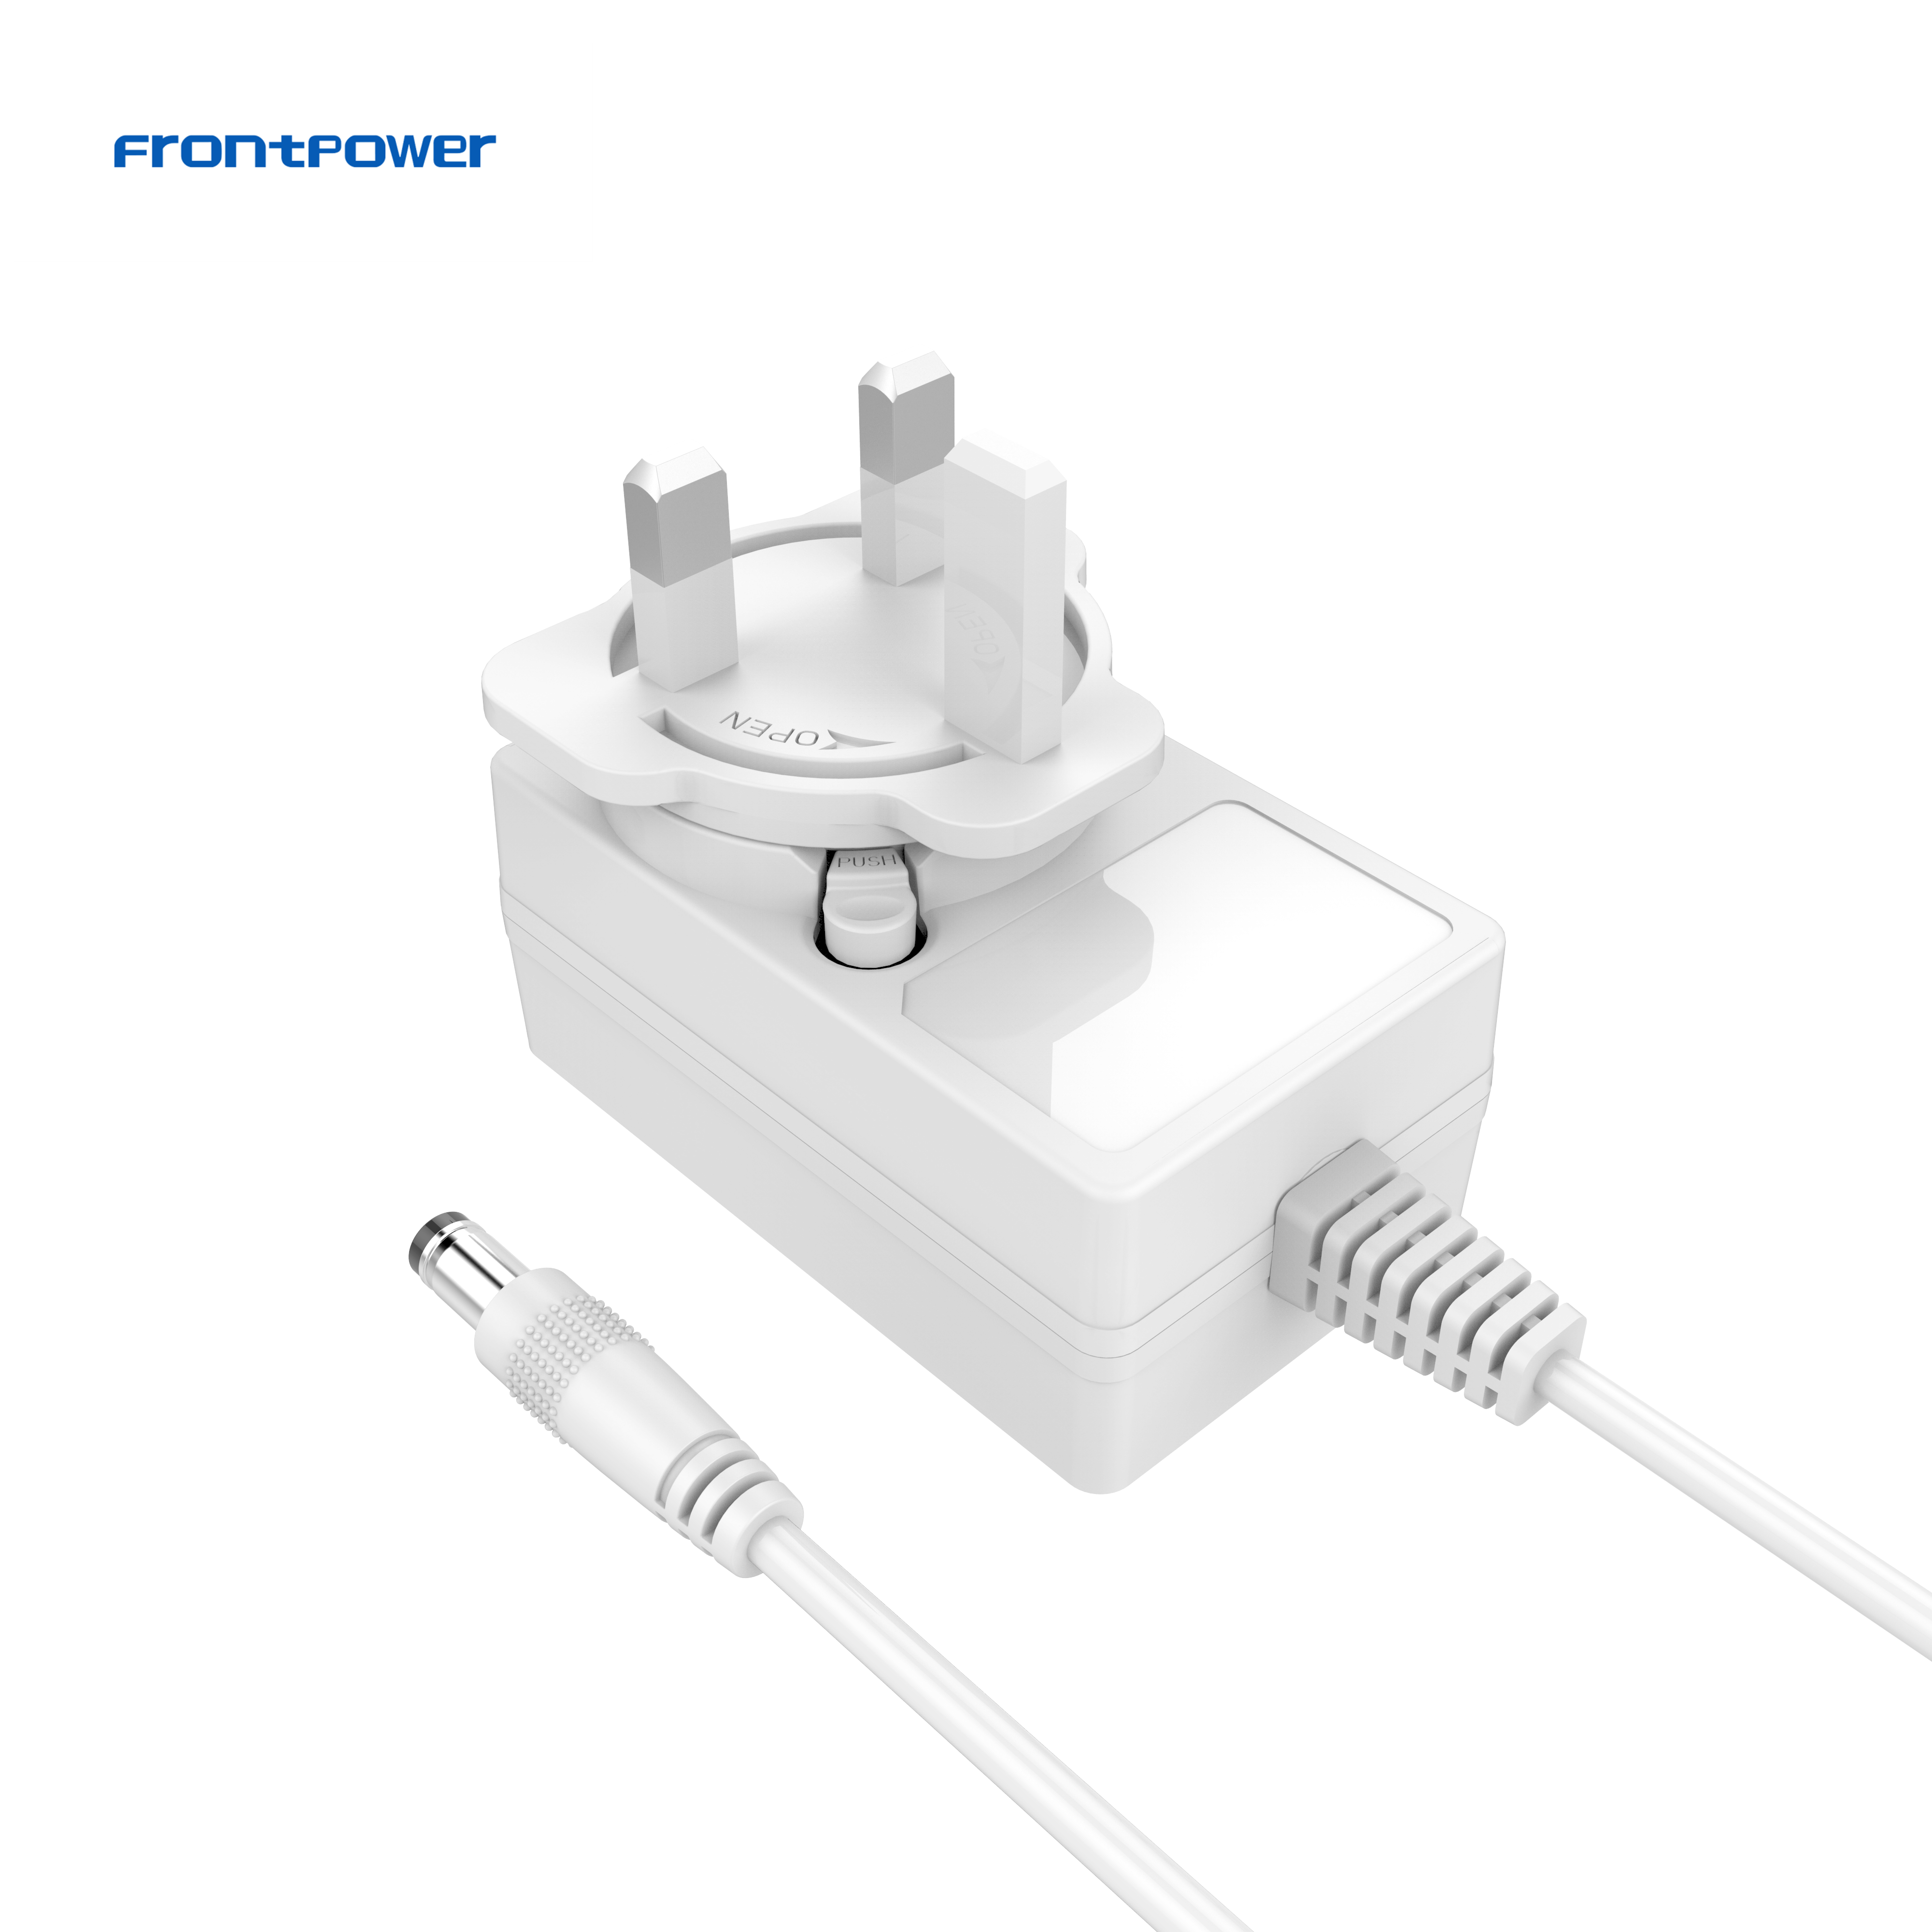 5V 3A 3.5A 9V 12V 2A 24V 1A US EU UK AU PSE JP Indian SAA Removable Plug SMPS ACDC Charger White Power Supply Adapter EN62368 UL